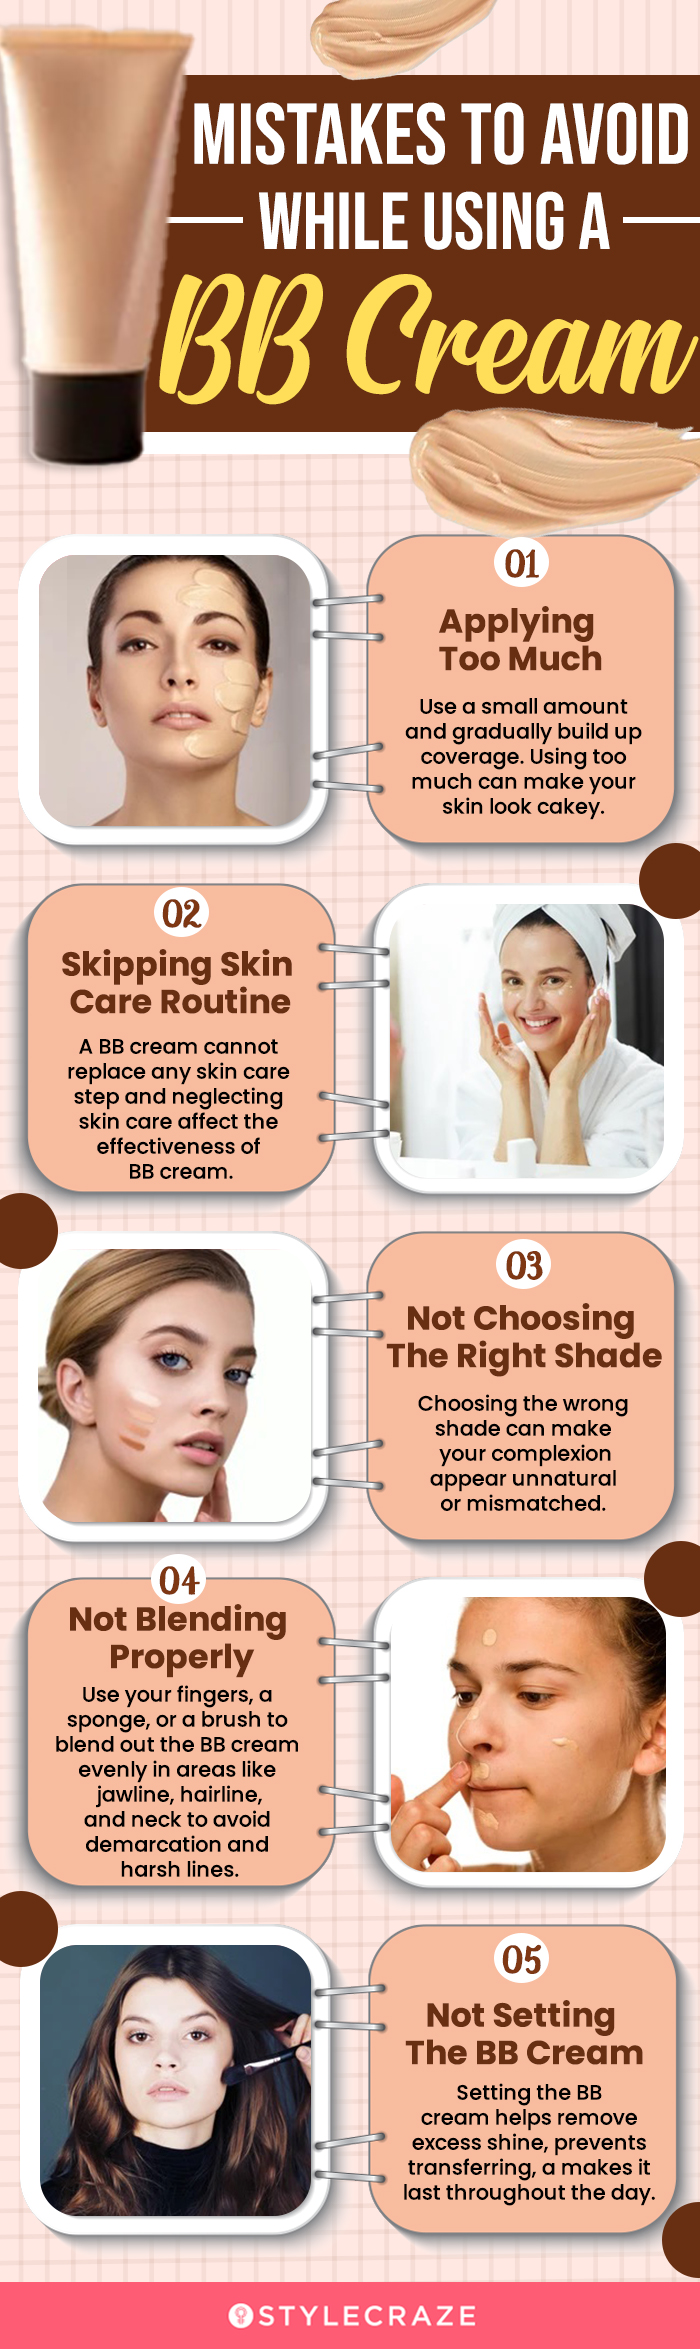 Mistakes To Avoid While Using A BB Cream (infographic)